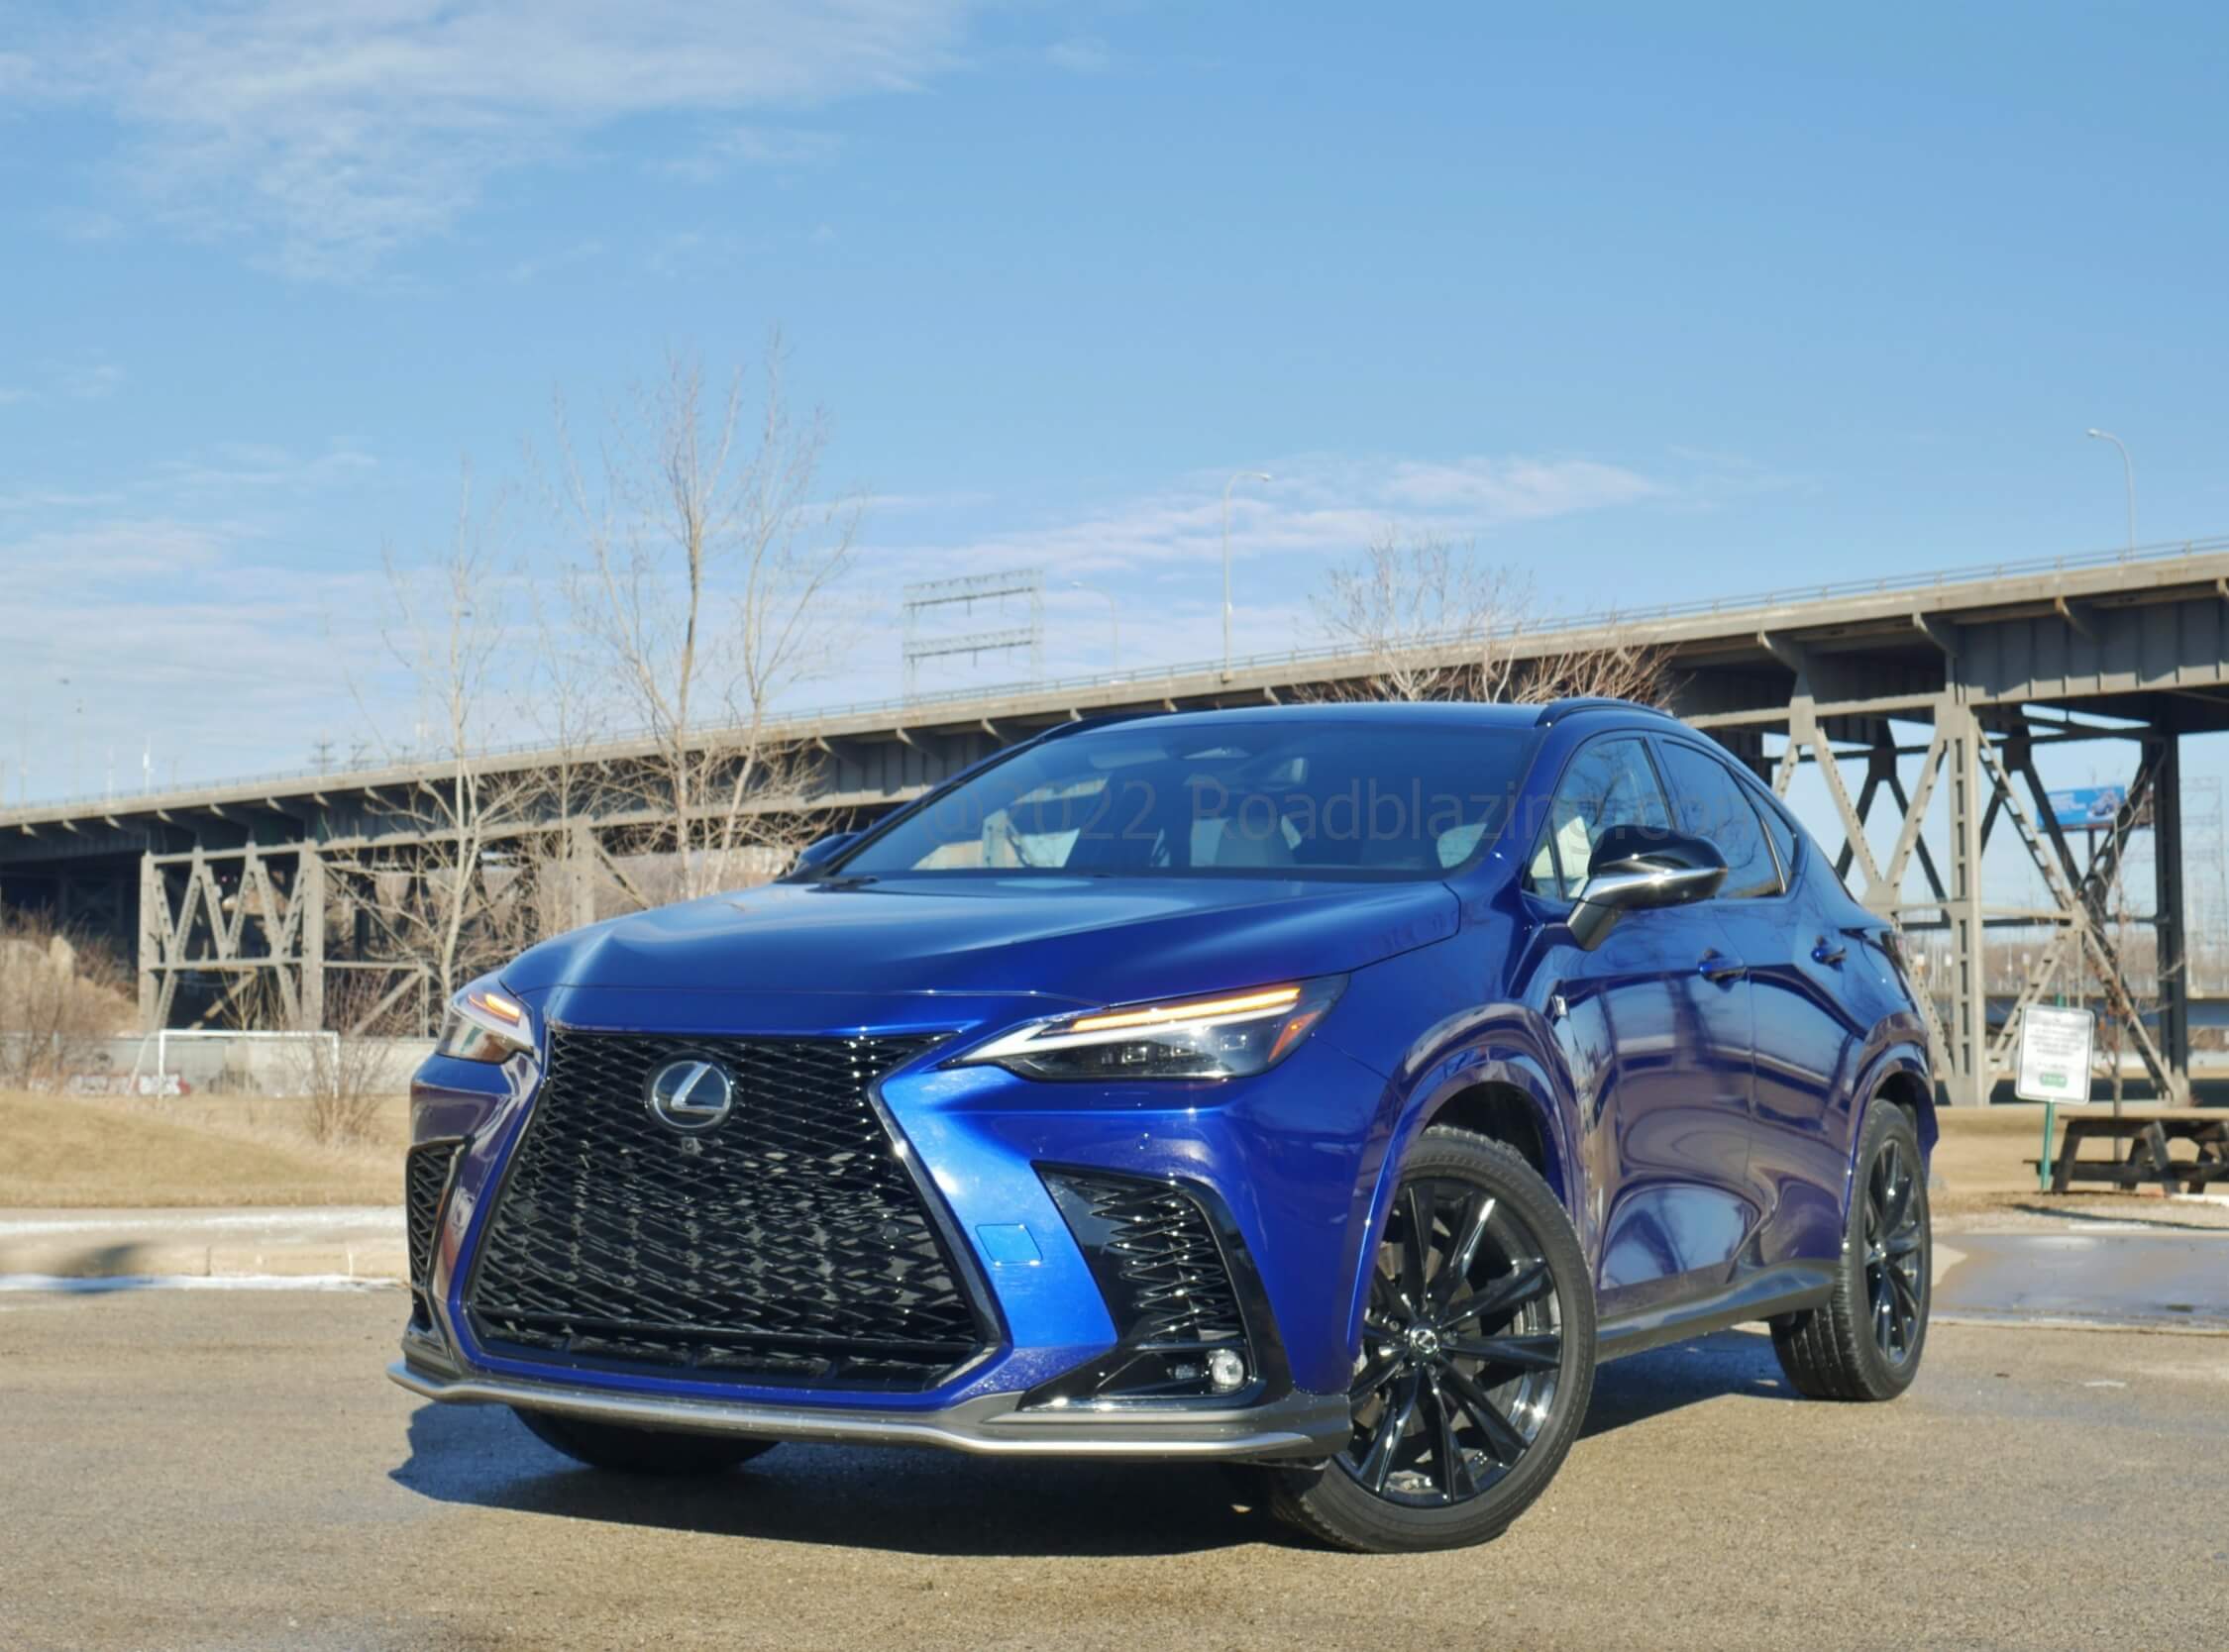 2022 Lexus NX 450h+ F-Sport AWD: more upright, fully descending Spindle grille and corner fangs, all darkened